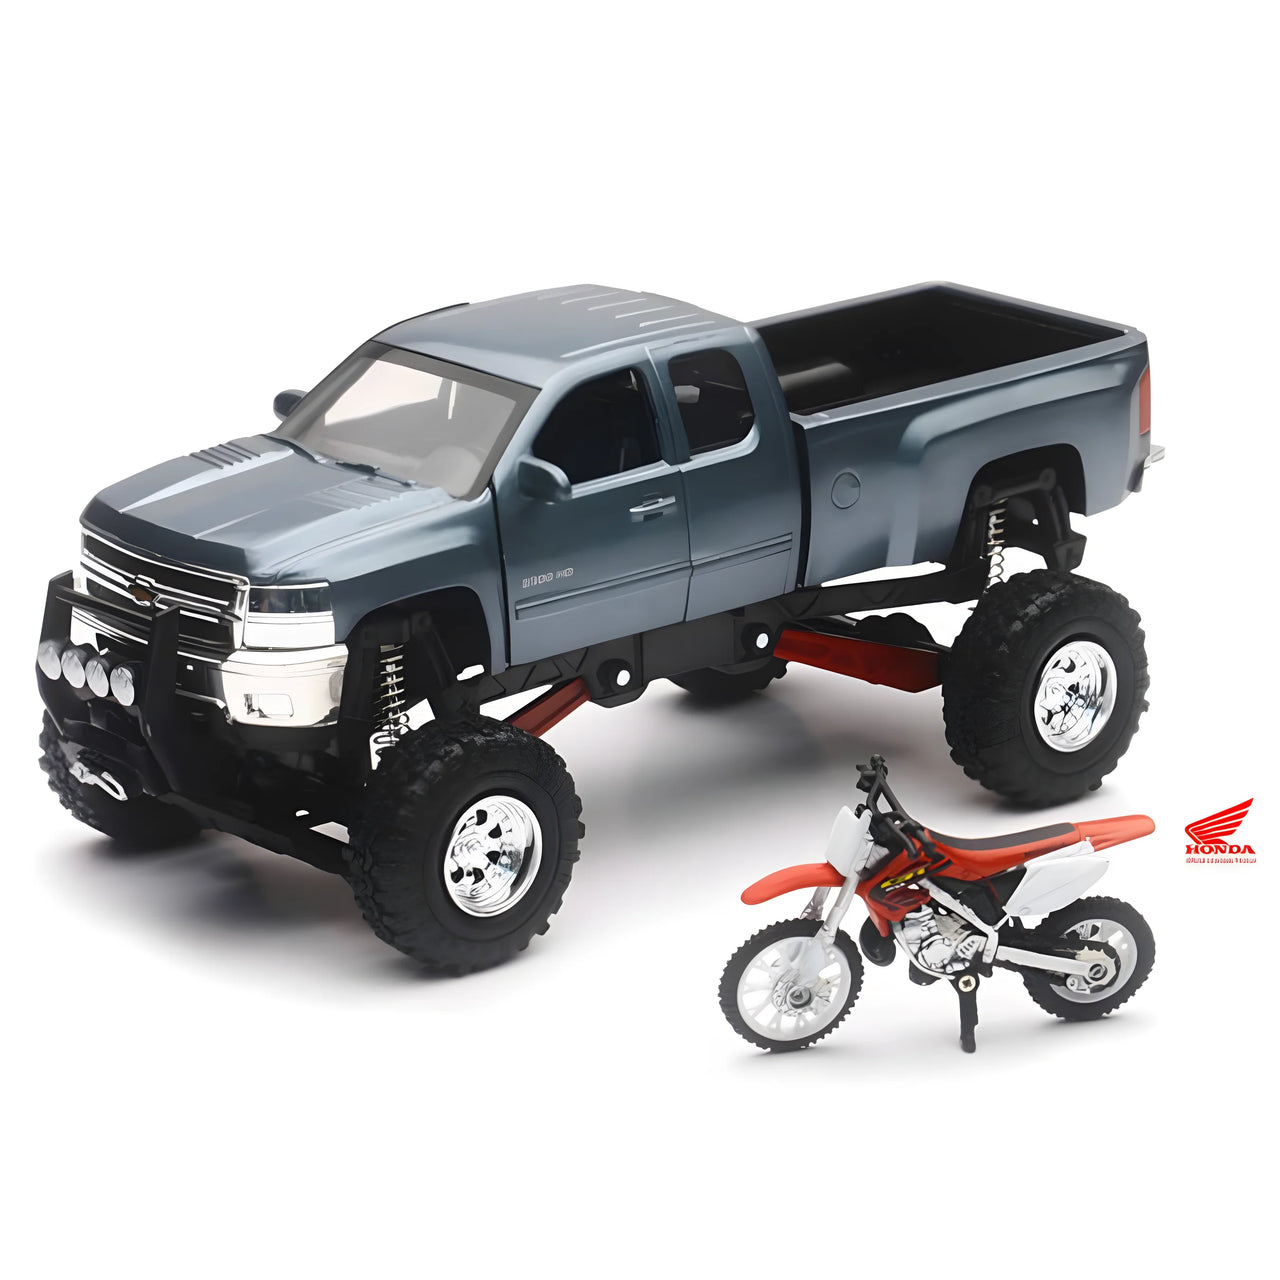 SS-54426 Chevrolet 2500HD Pickup Truck &amp; Honda CR250R Motorcycle 1:32 Scale